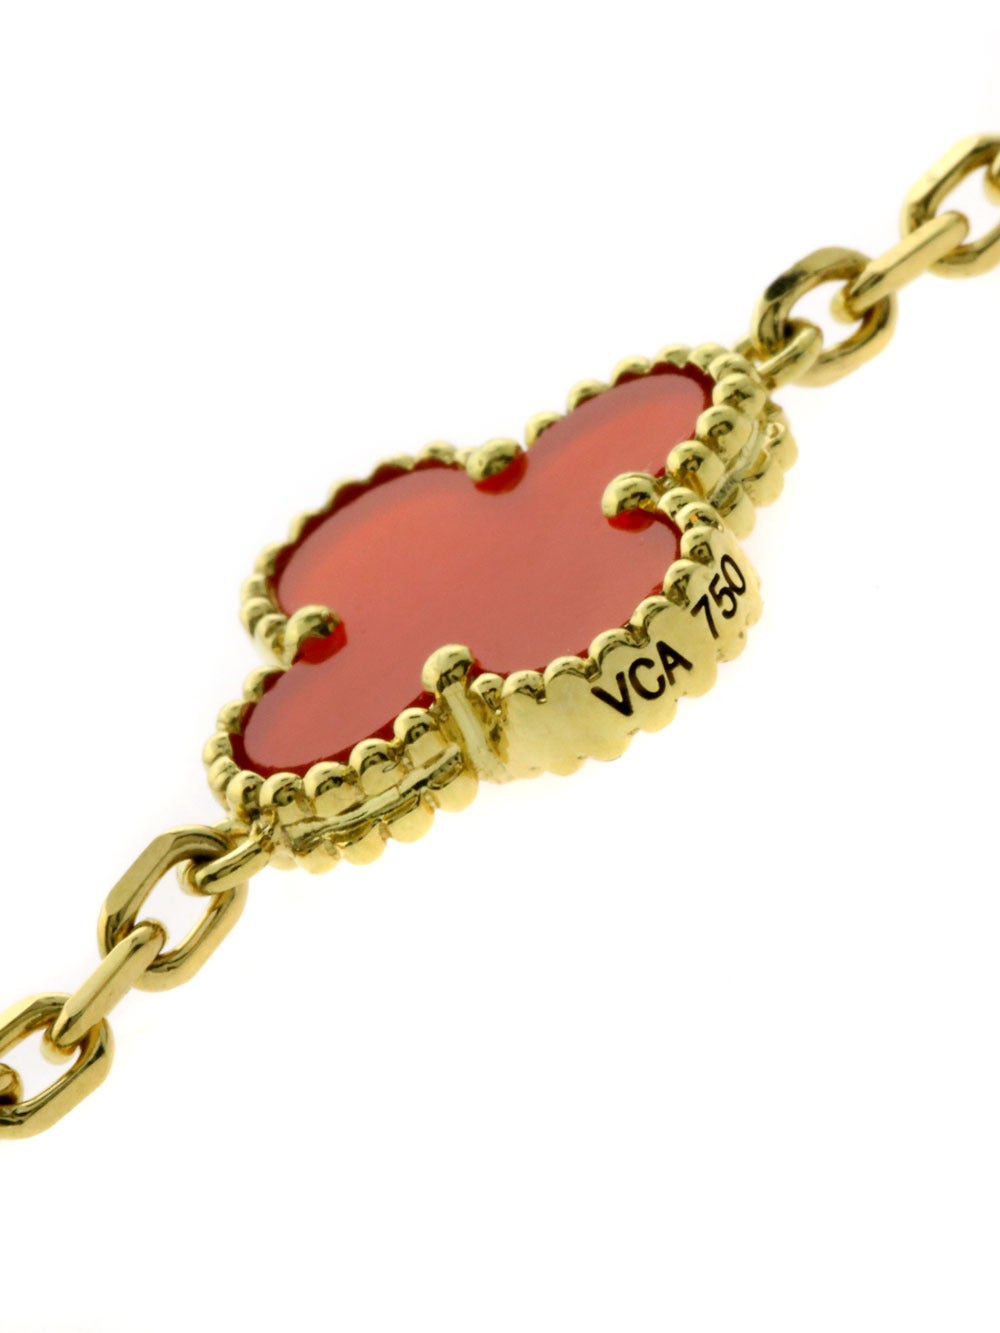 Boasting a stylish 18k Yellow Gold design and a strong showing of Van Cleef & Arpels’ iconic floral motif, this Carnelian Necklace is something truly special. Van Cleef & Arpels has extremely high standards when it comes to Carnelian, scouring the